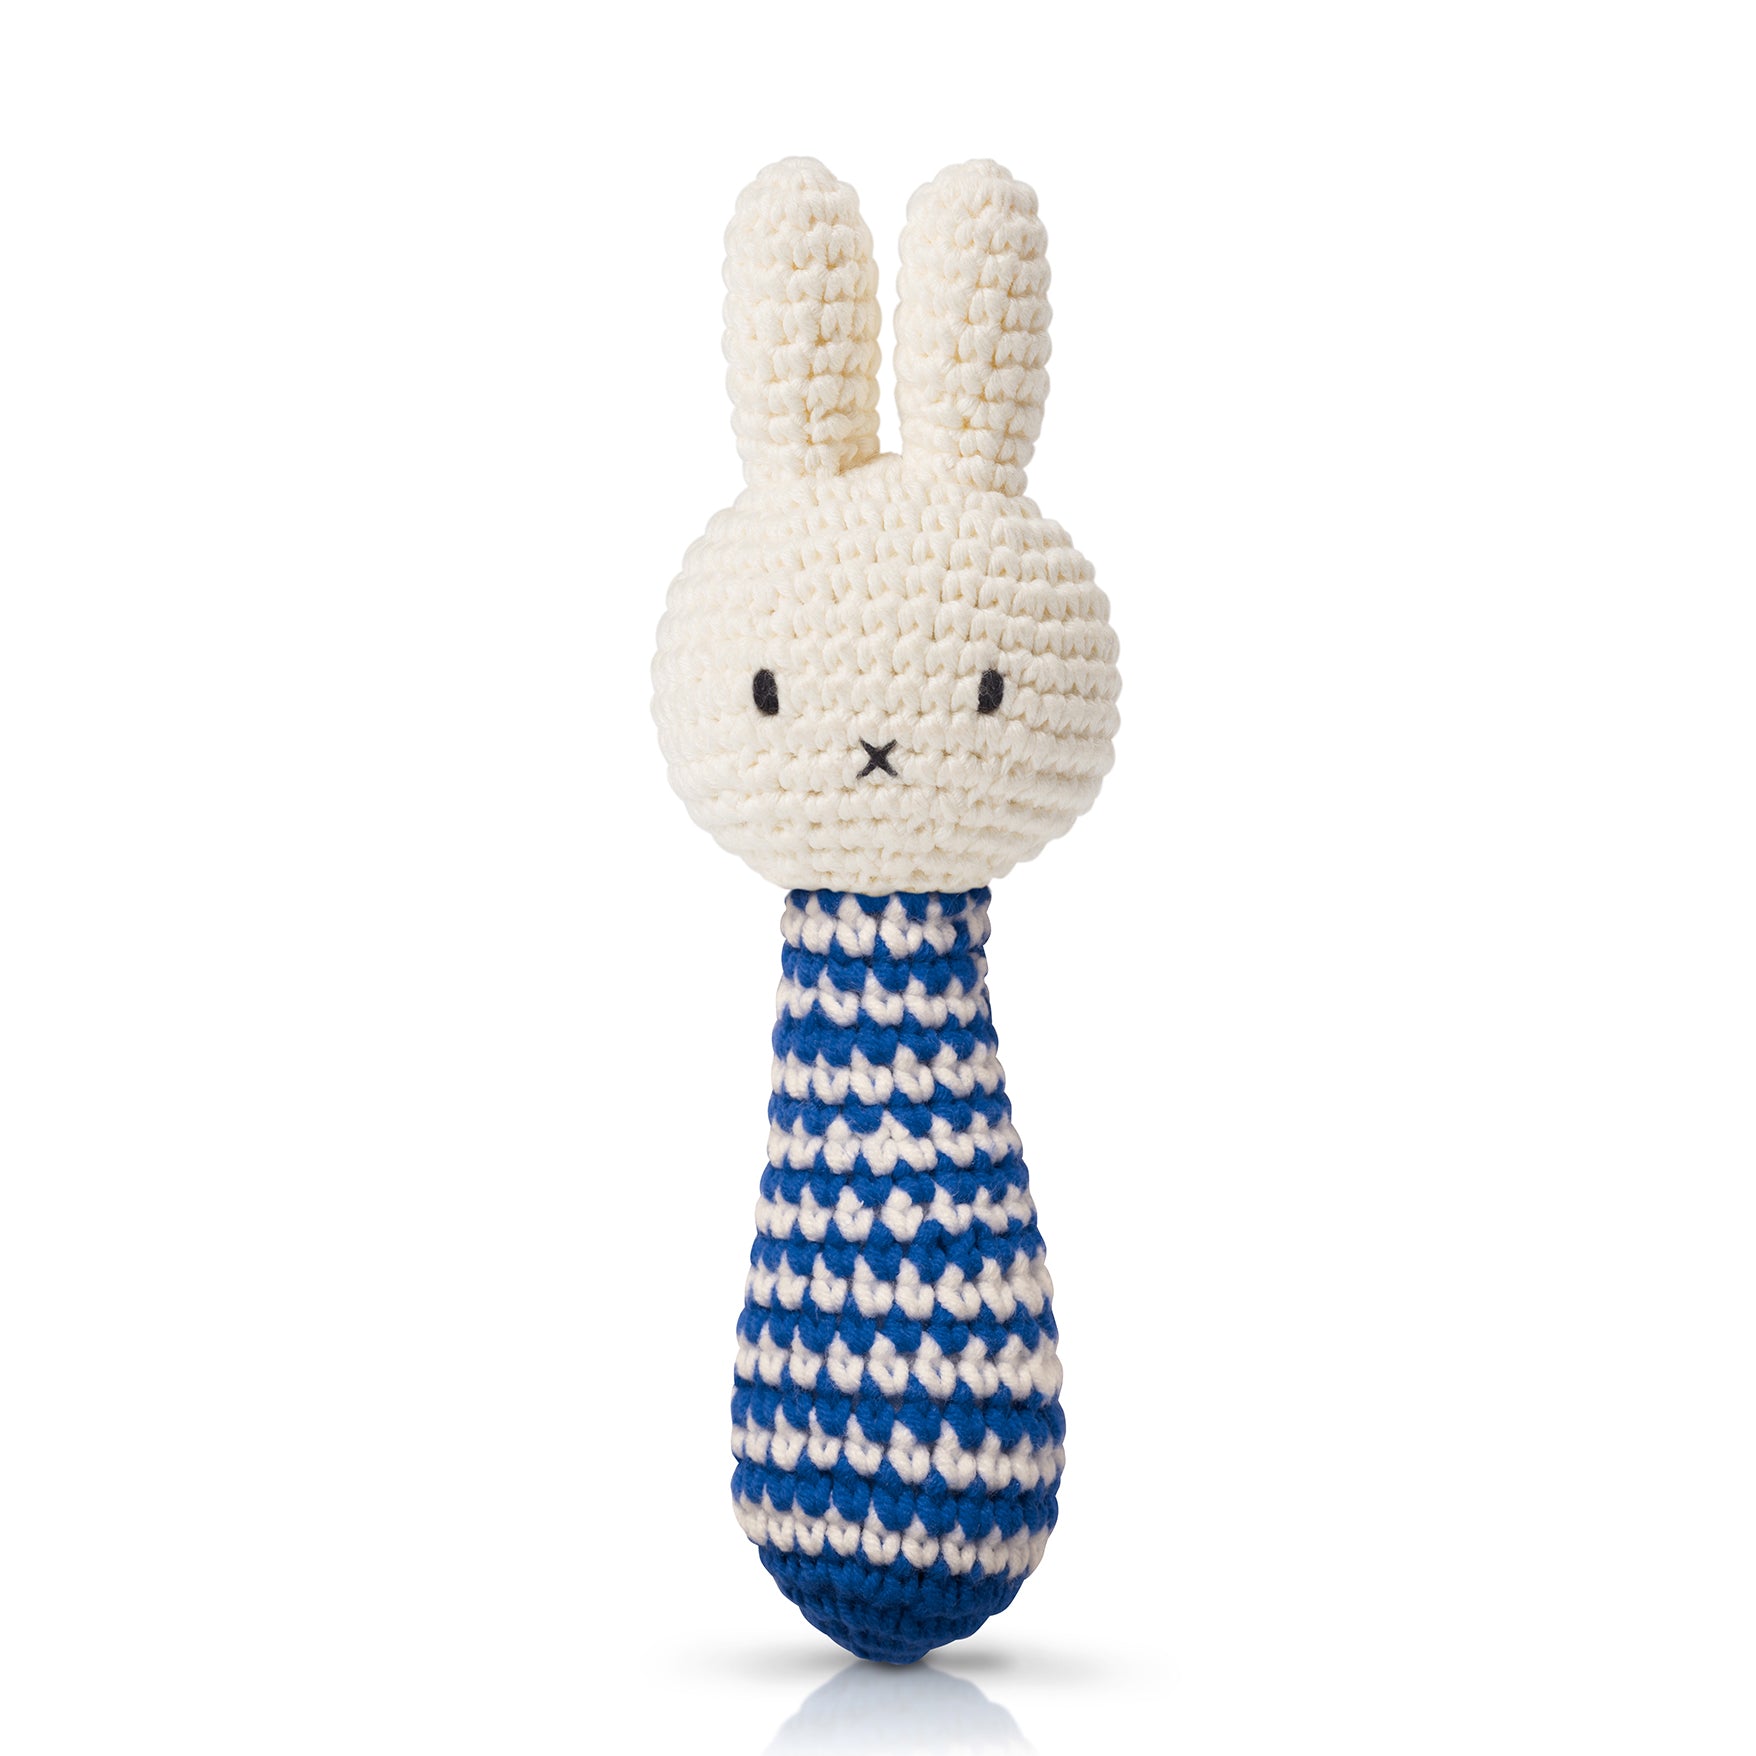 Handmade Miffy rattle (Available in 3 colors)